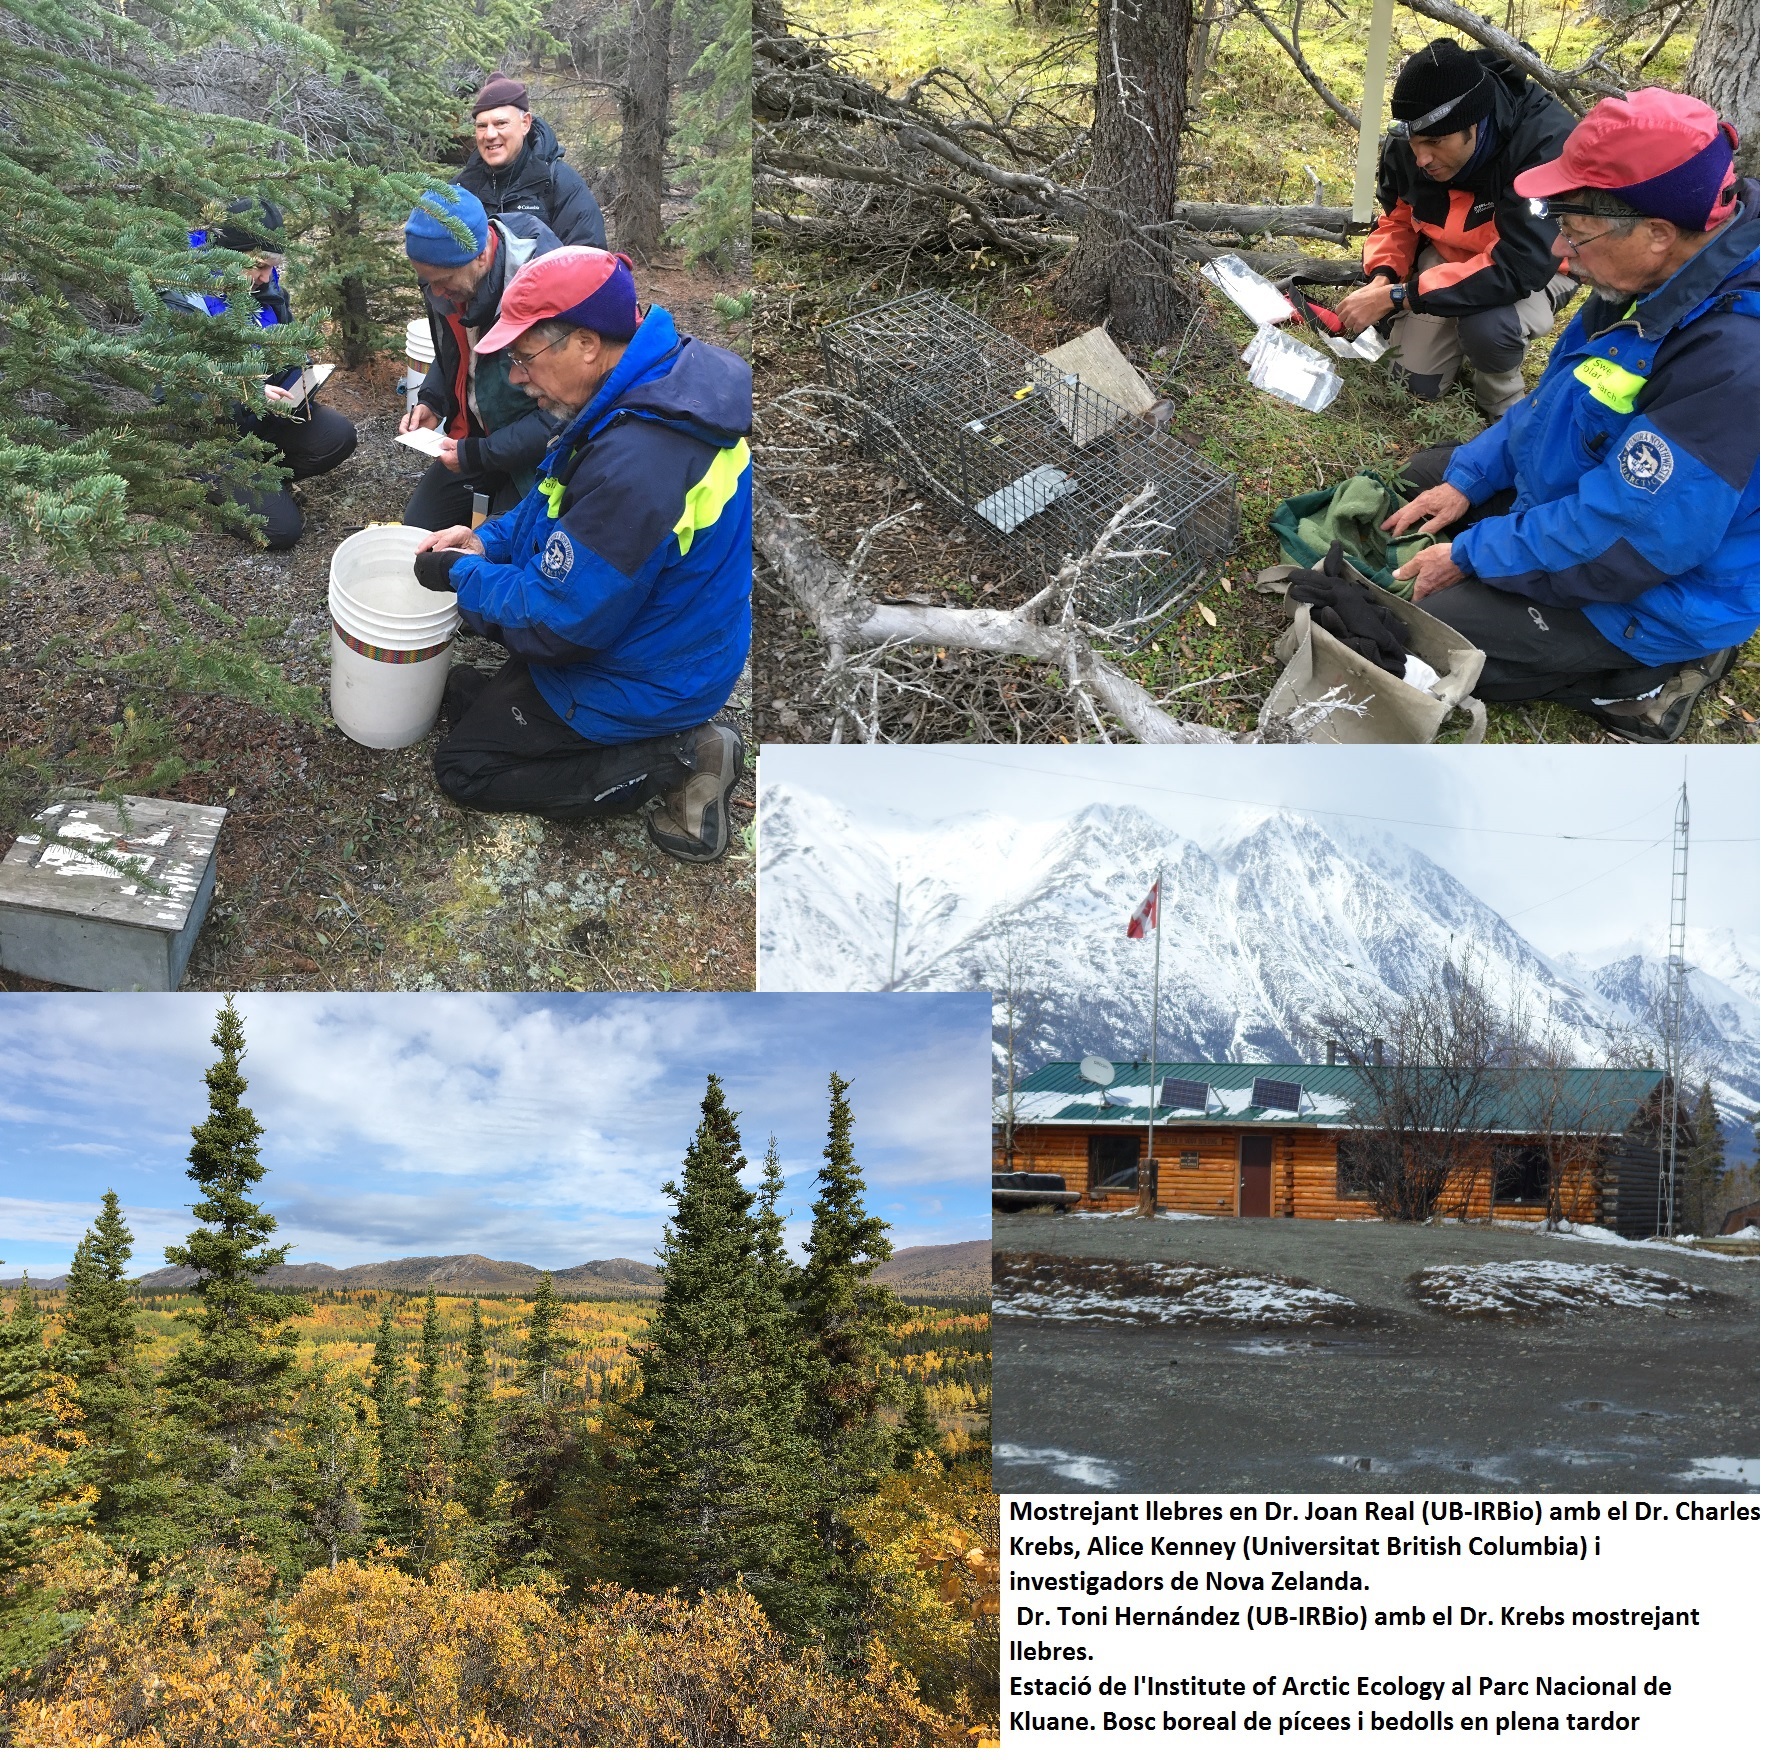 Studying the long-term ecological changes in boreal areas of the Yukon in Canada